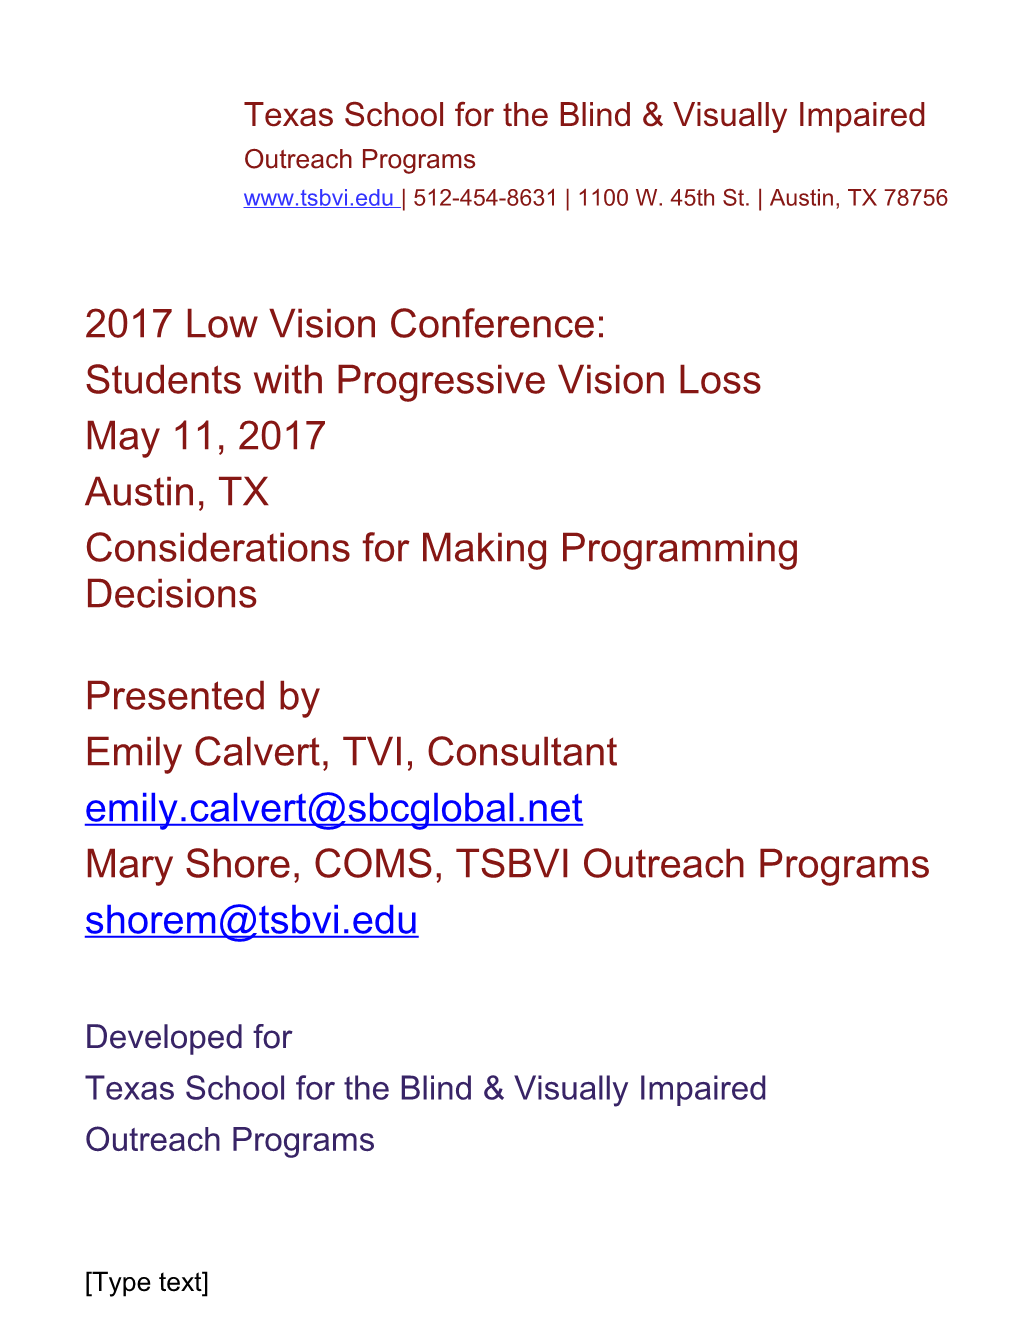 Students with Progressive Vision Loss